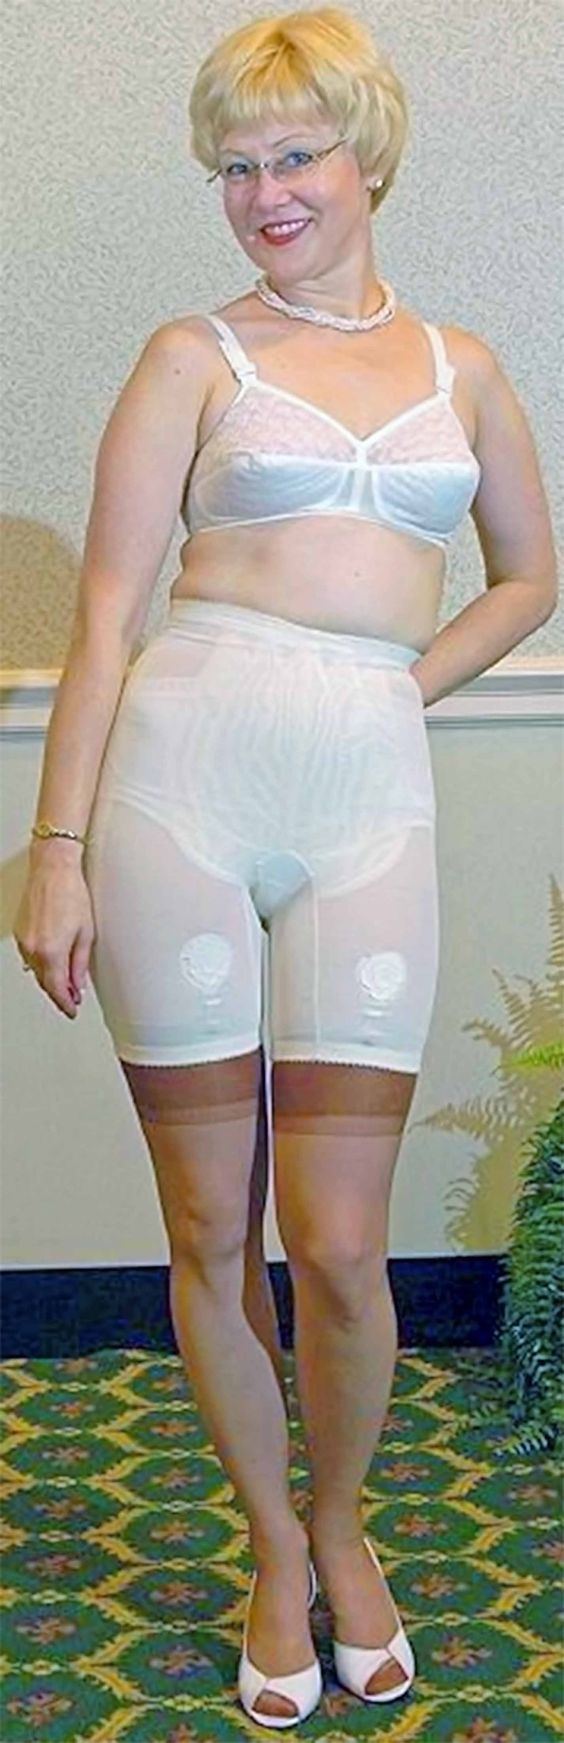 Mature dominant women in girdles picture